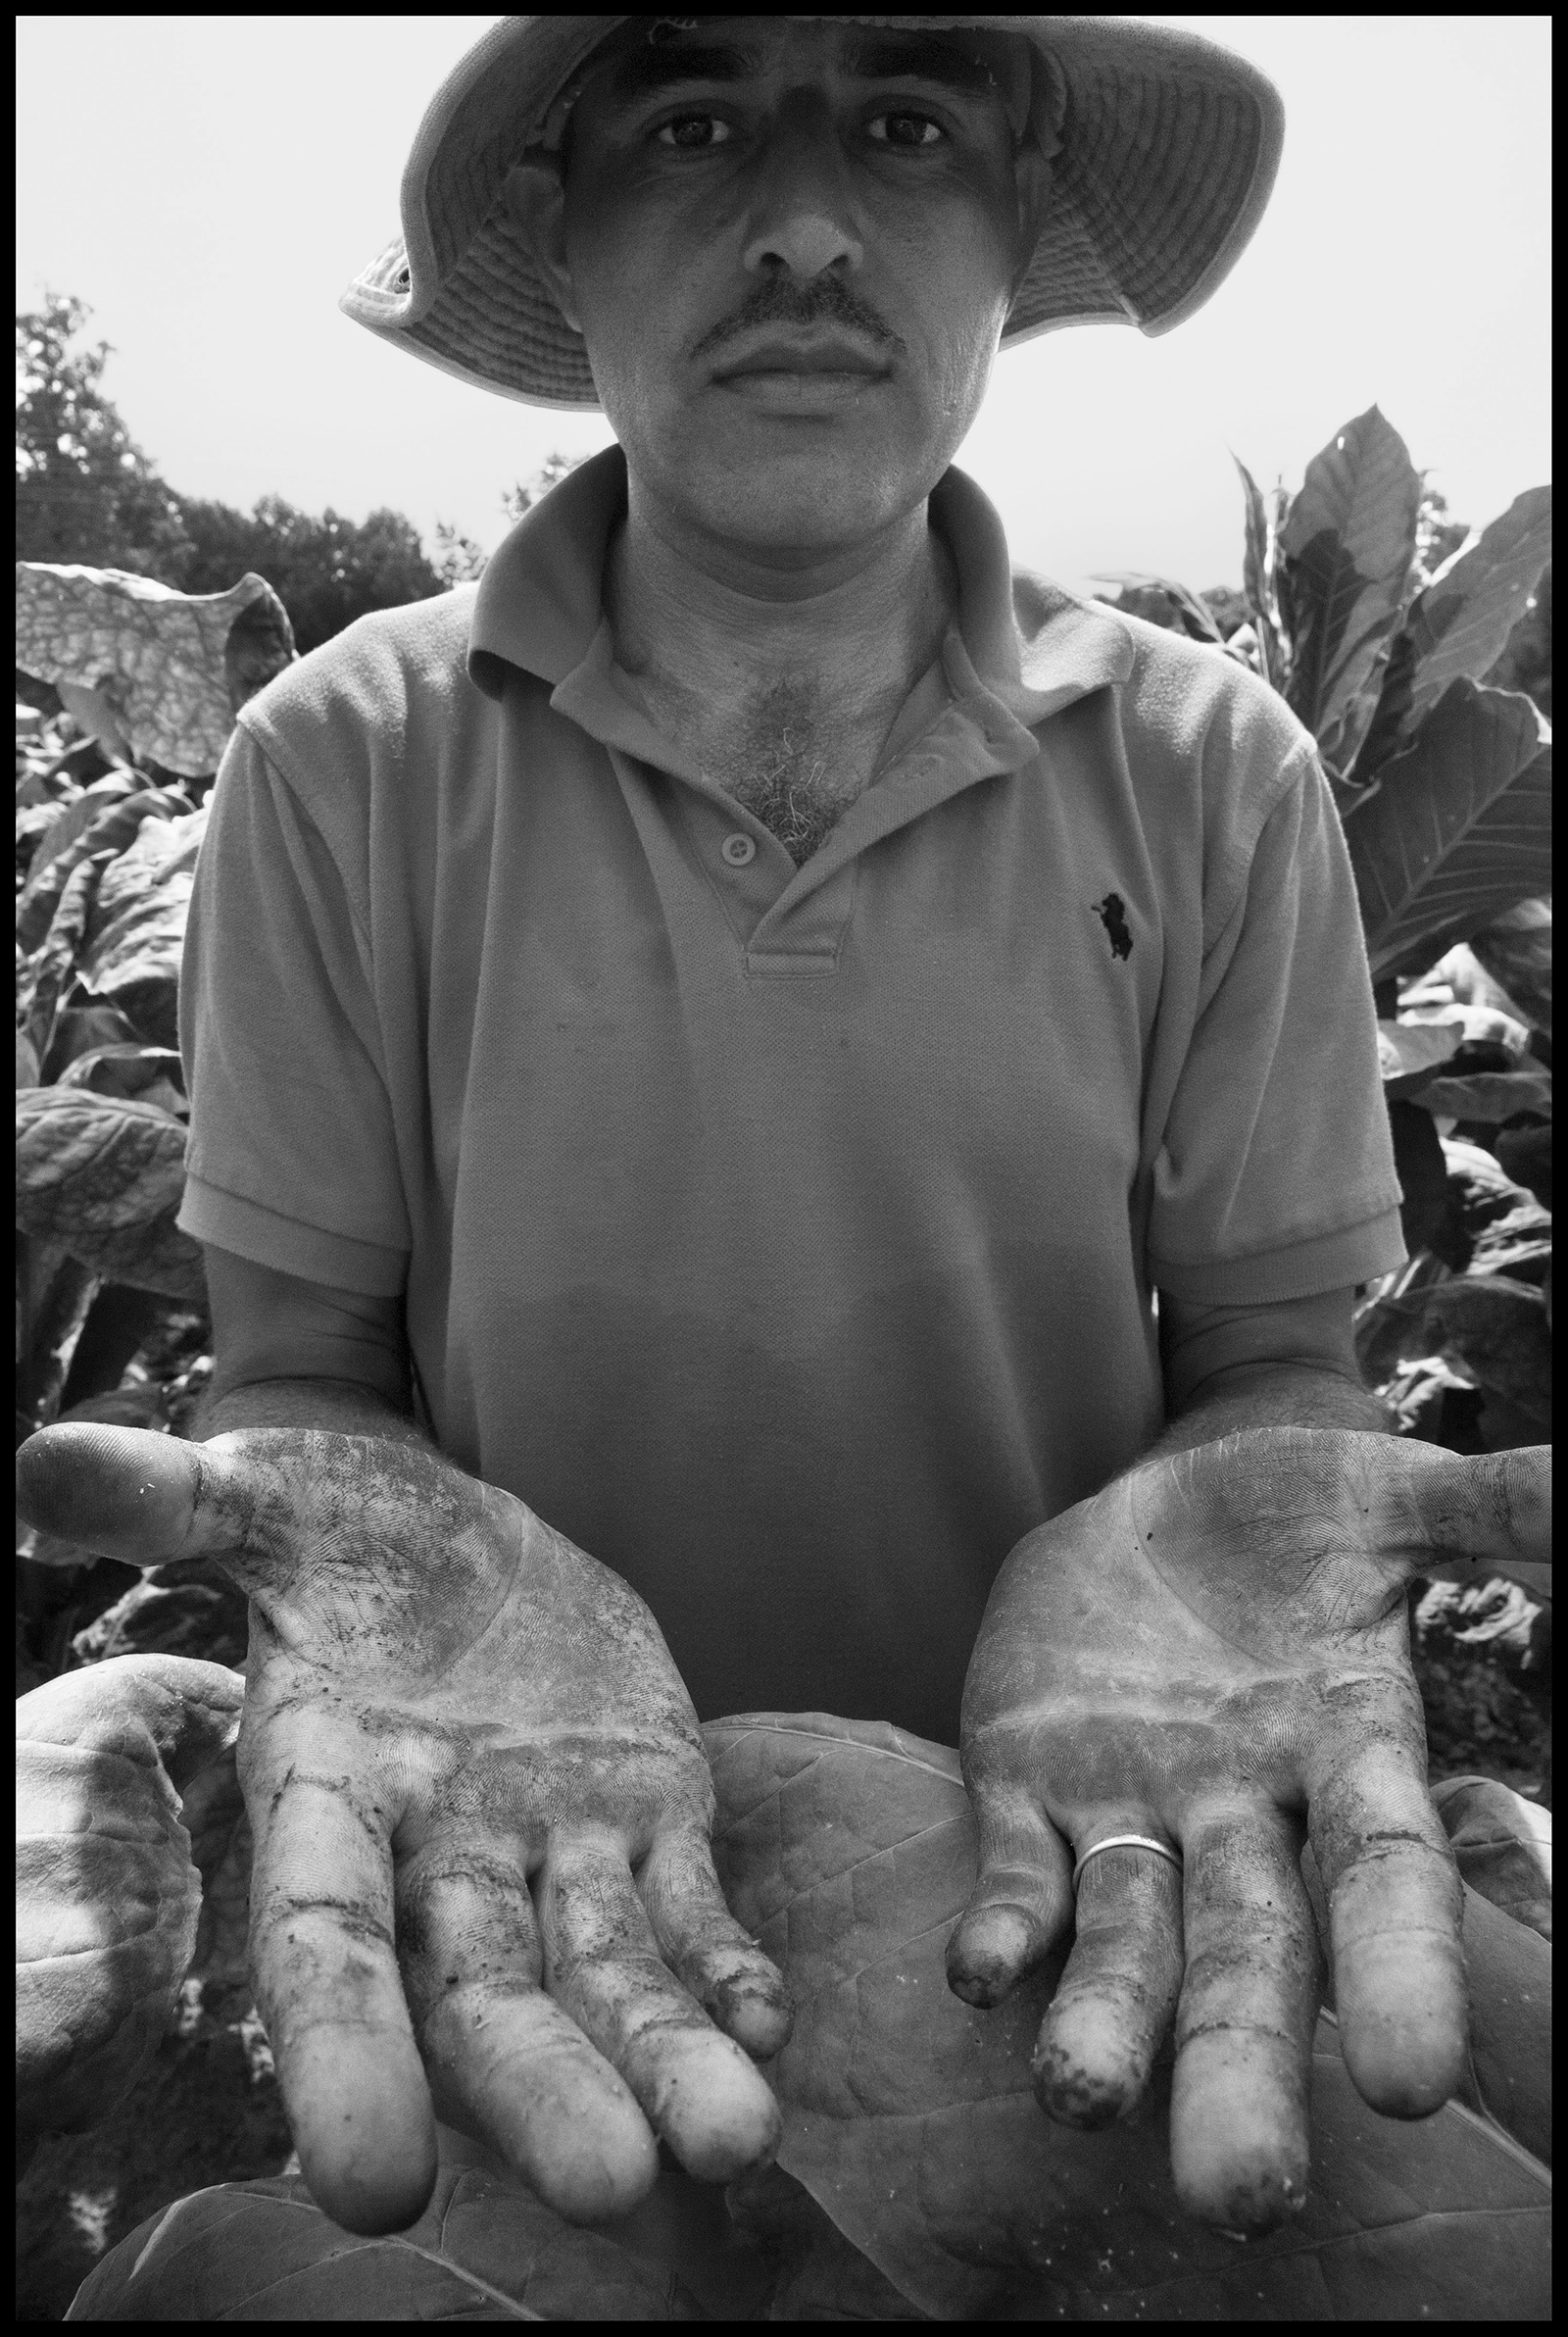 Tobacco farmer shows his injured hands